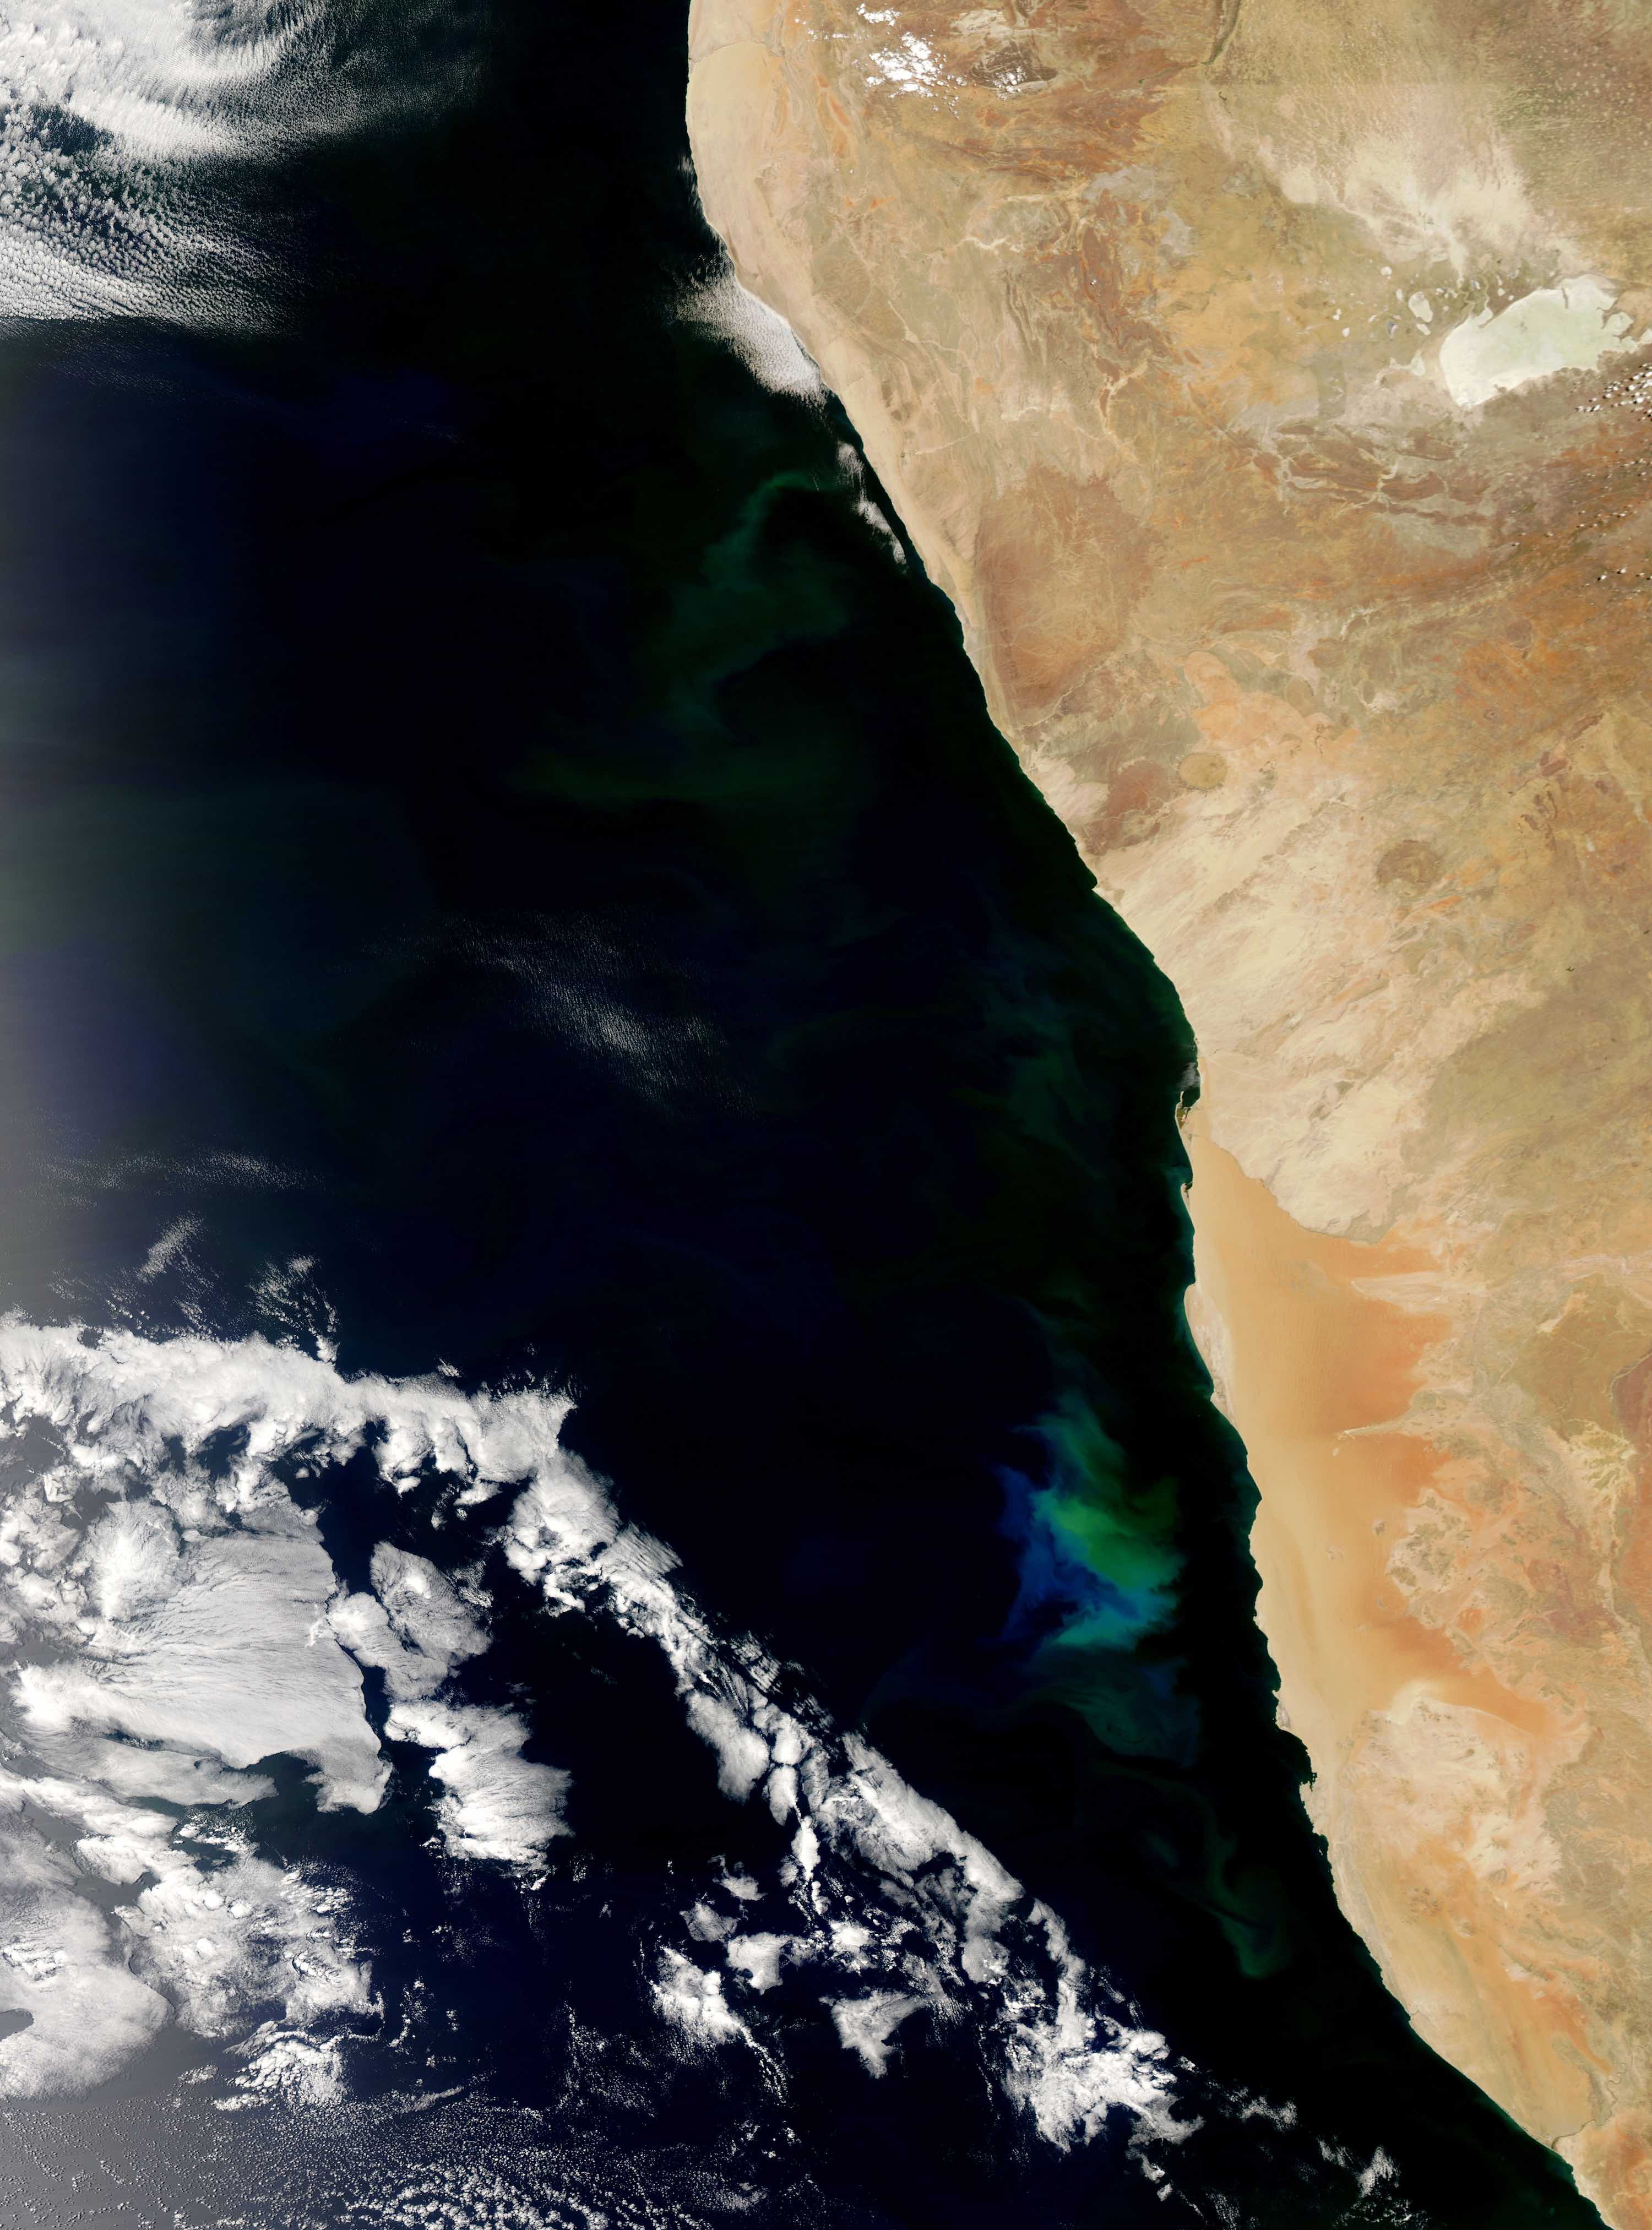 A satellite image of the ocean off the Namibian coast.